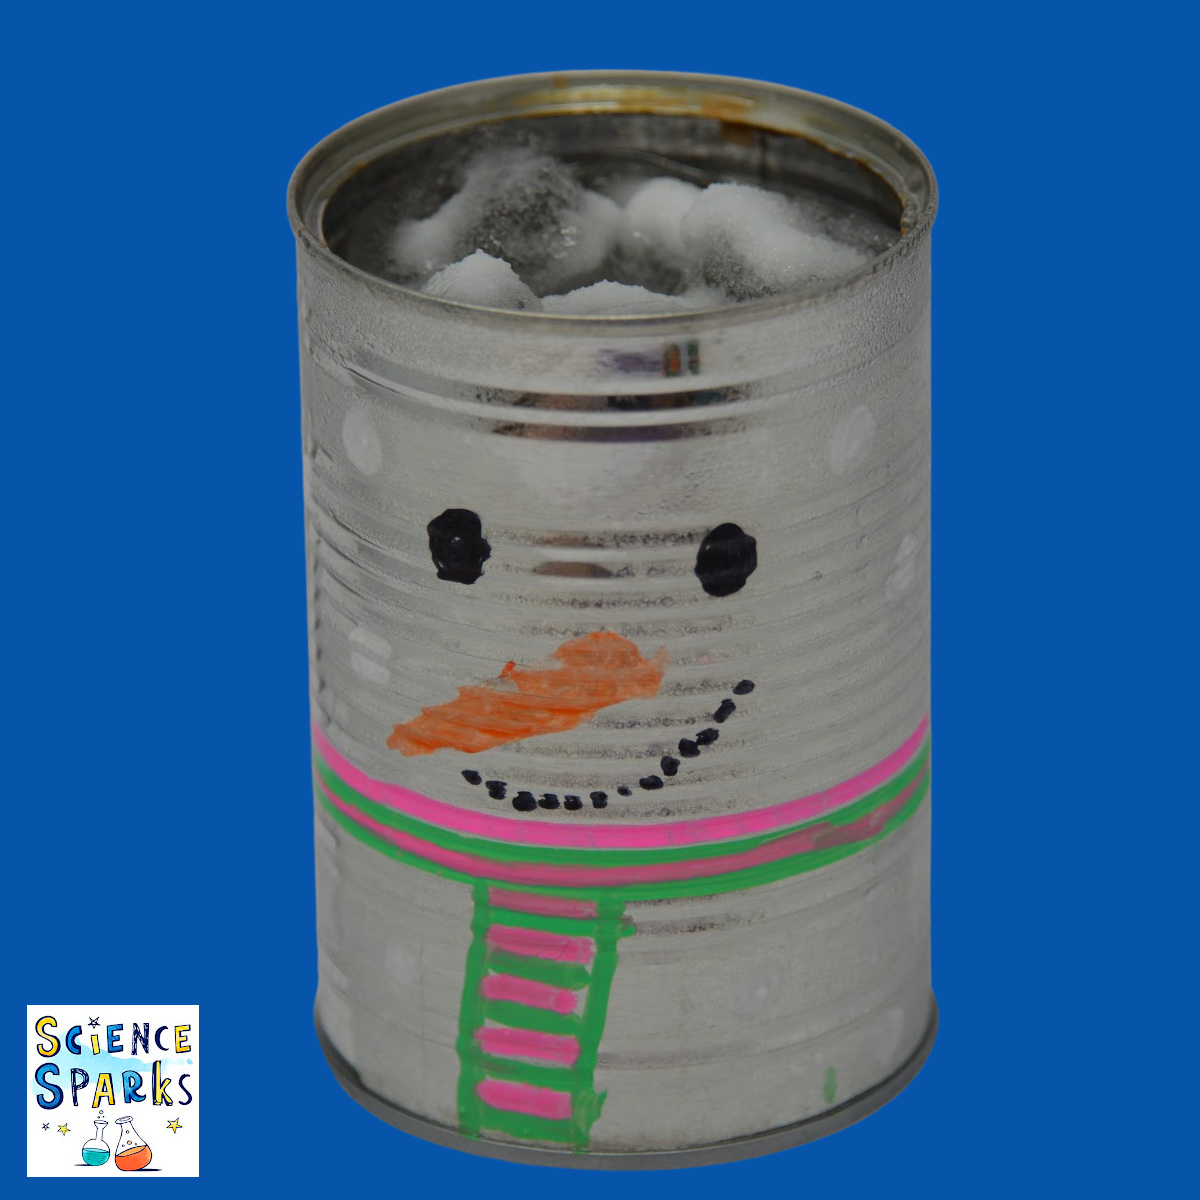 Fairy's Frost Snow Making Kit in a Jar